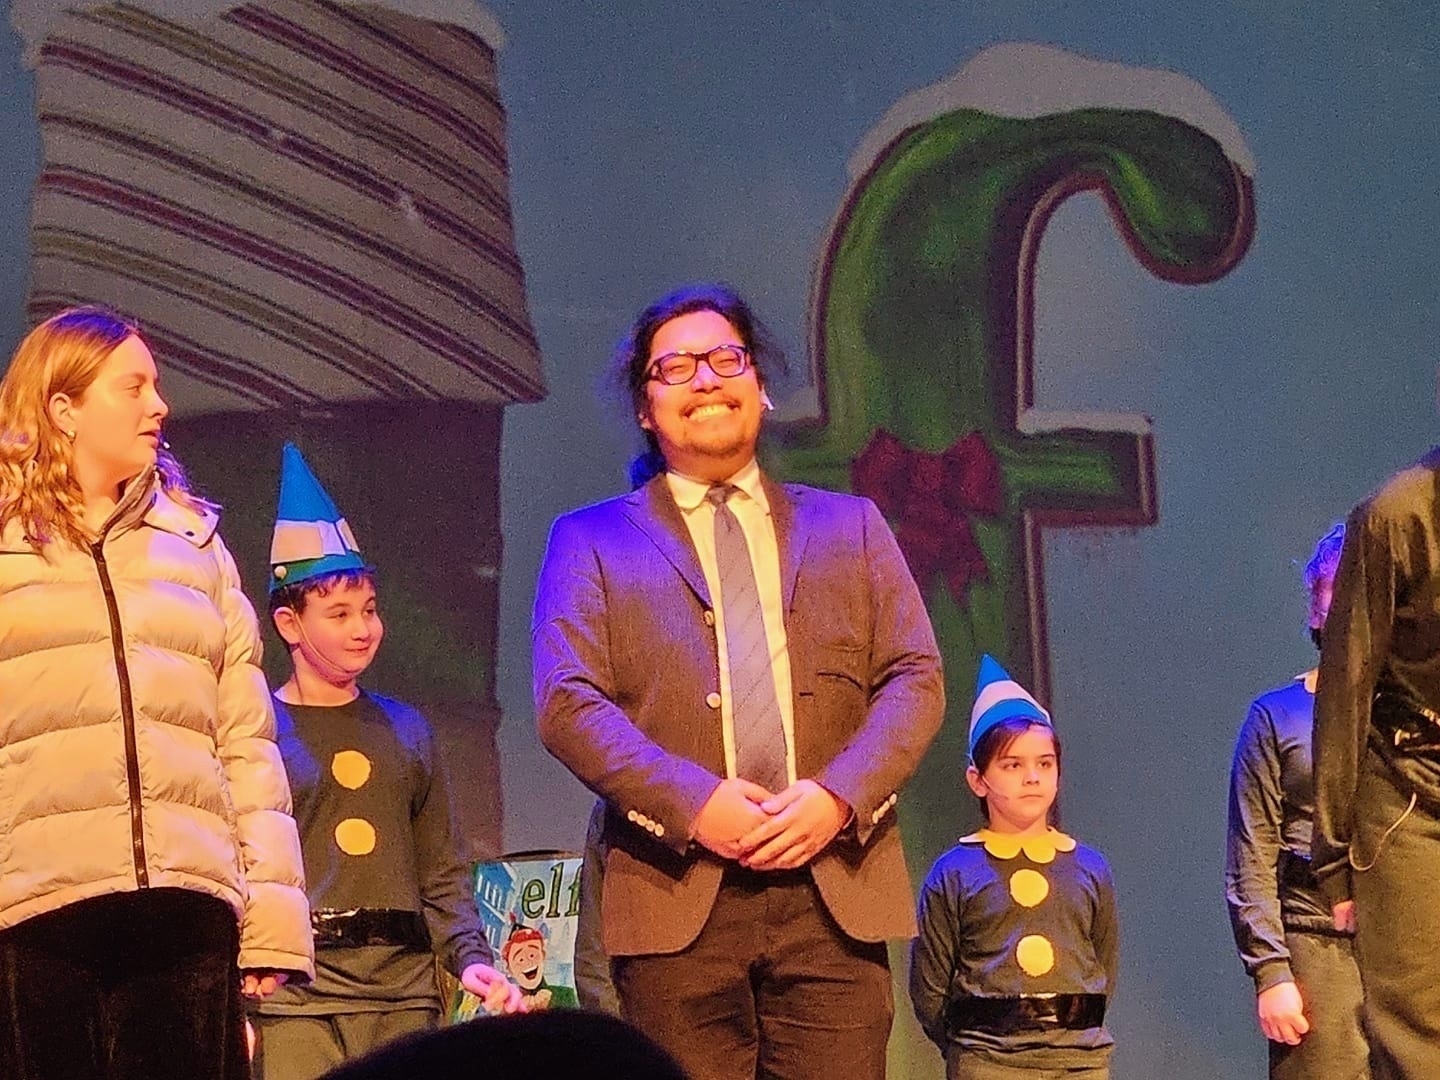 Group of people on stage with a man in a suit smiling at the center, flanked by individuals in elf costumes.